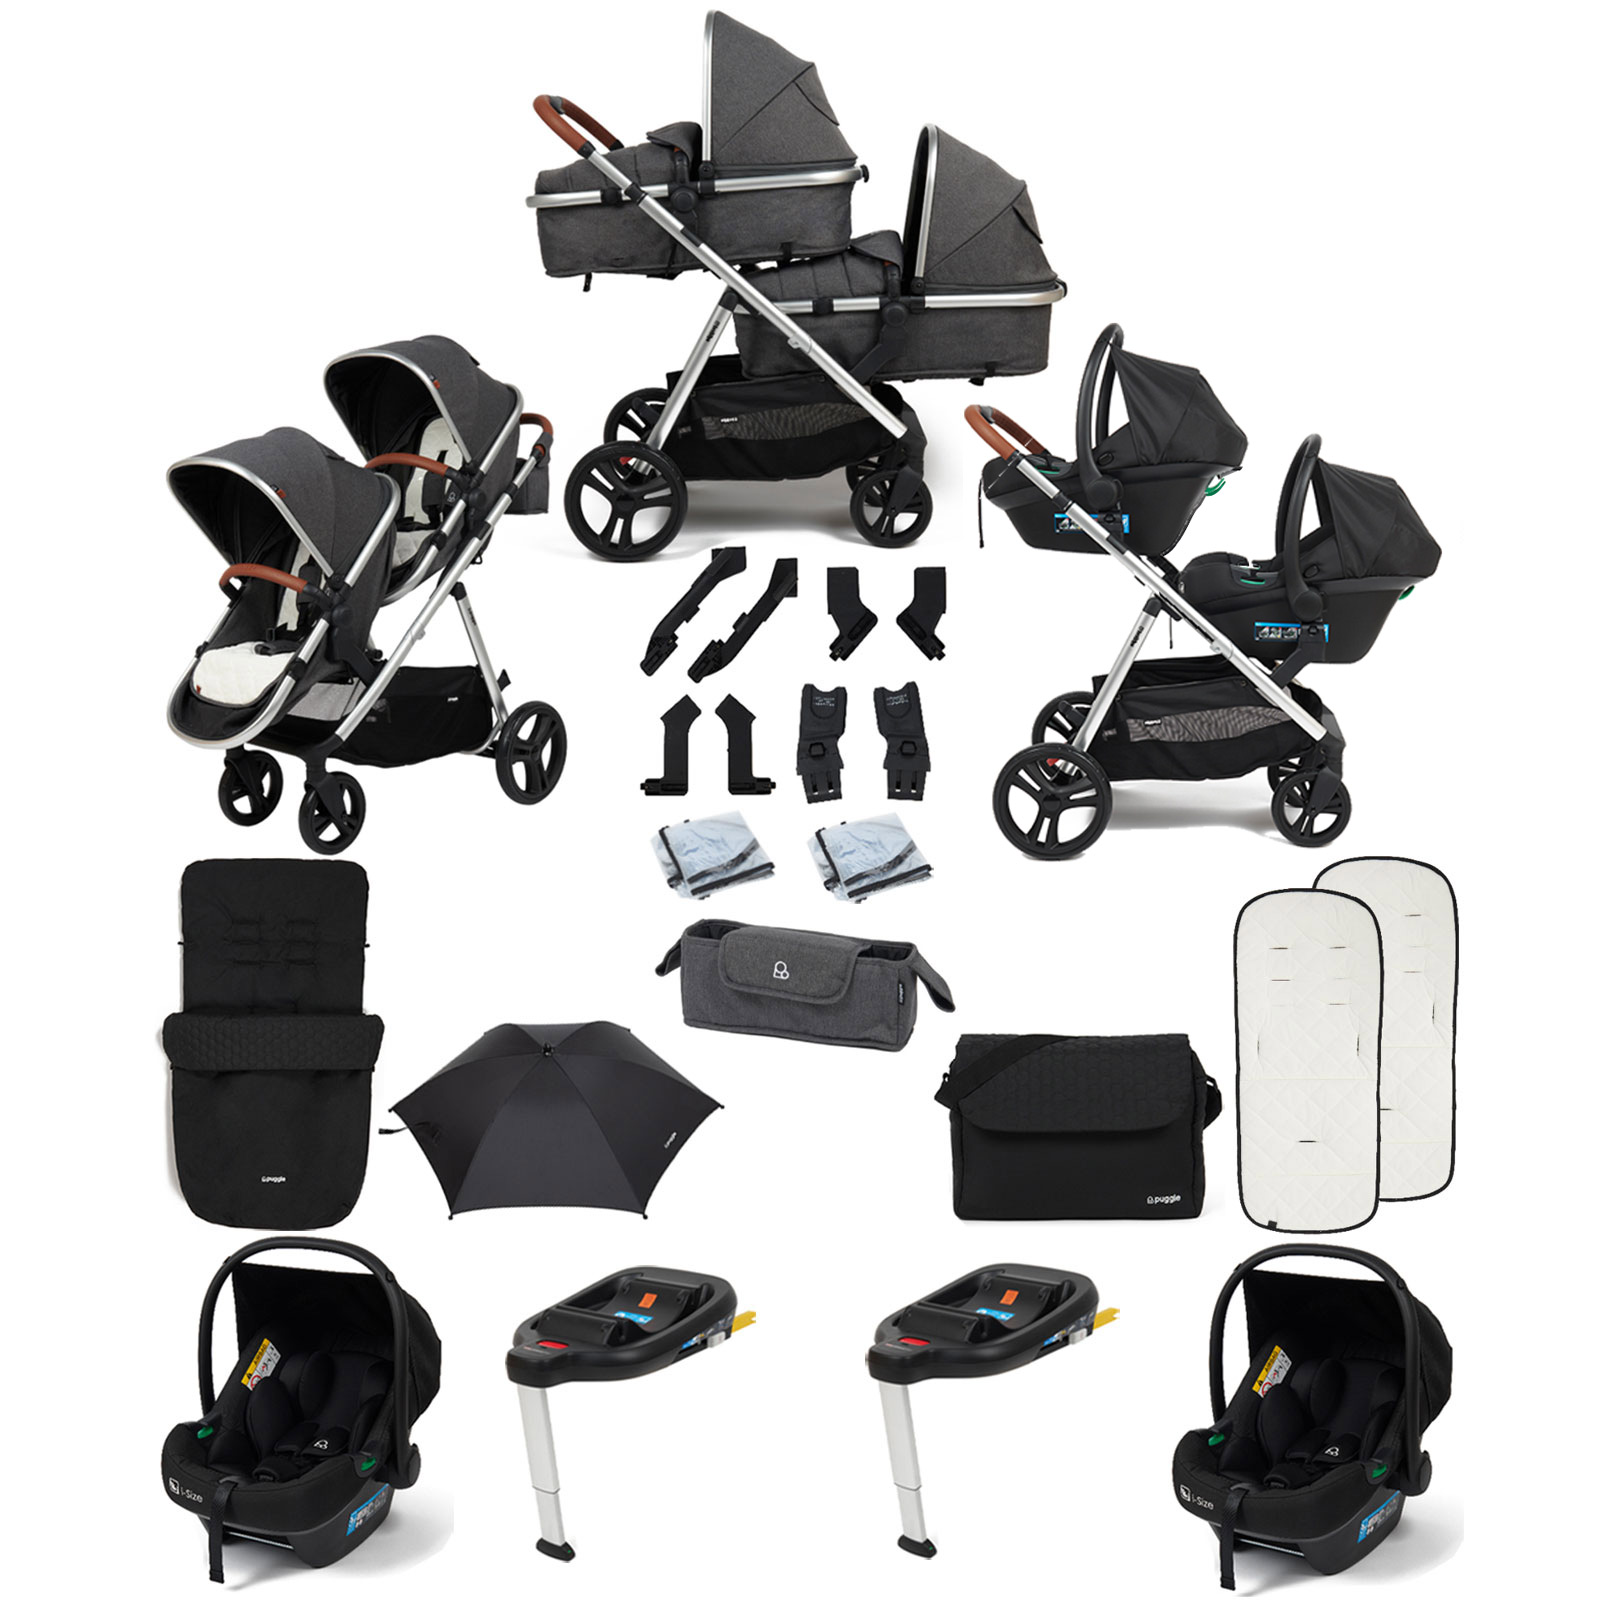 Puggle Memphis 2-in-1 Duo Double Travel System with 2 i-Size Car Seats, 2 ISOFIX Bases, Footmuff, Parasol, and Changing Bag - Platinum Grey